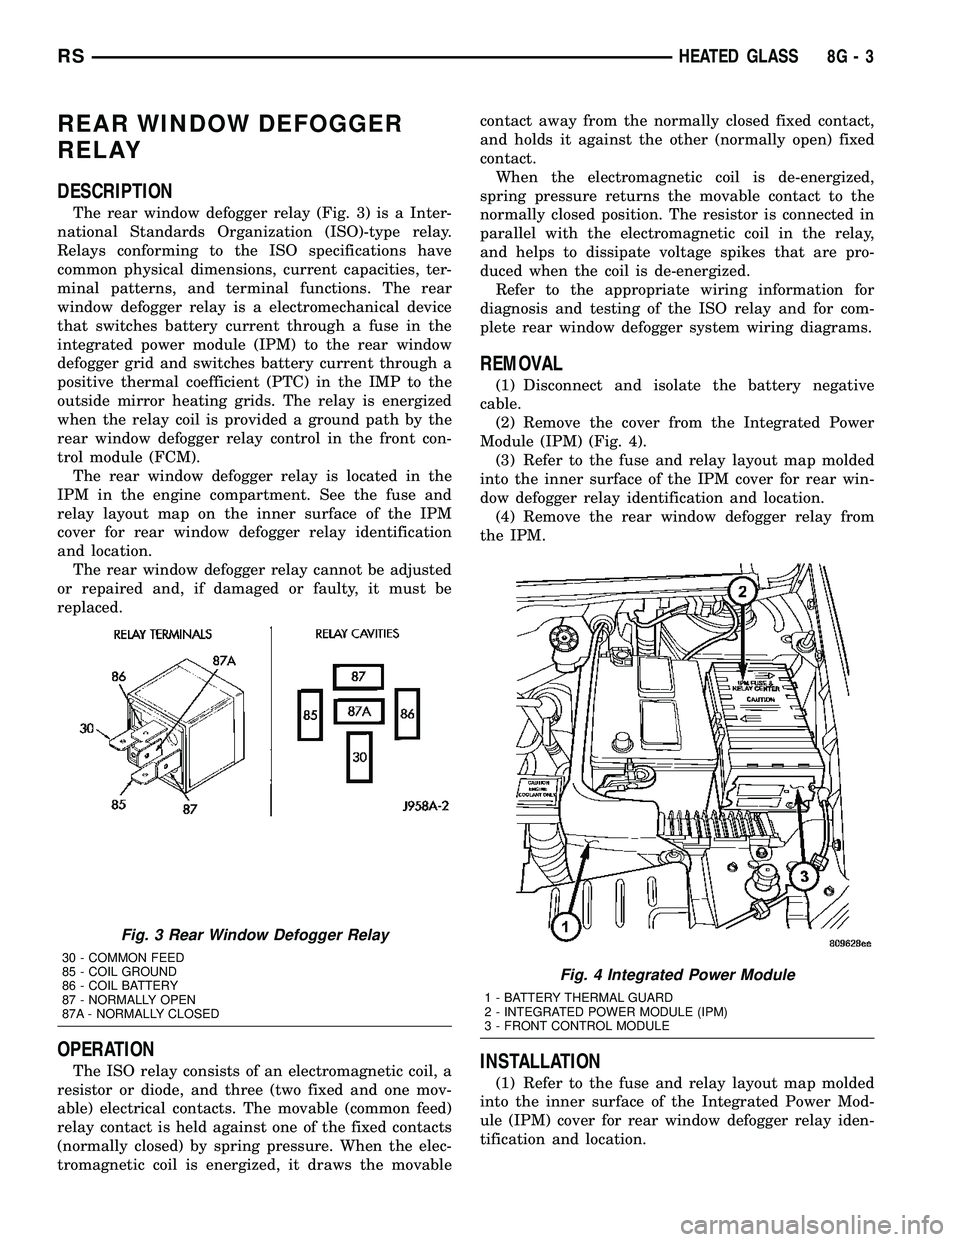 DODGE TOWN AND COUNTRY 2004  Service Manual REAR WINDOW DEFOGGER
RELAY
DESCRIPTION
The rear window defogger relay (Fig. 3) is a Inter-
national Standards Organization (ISO)-type relay.
Relays conforming to the ISO specifications have
common phy